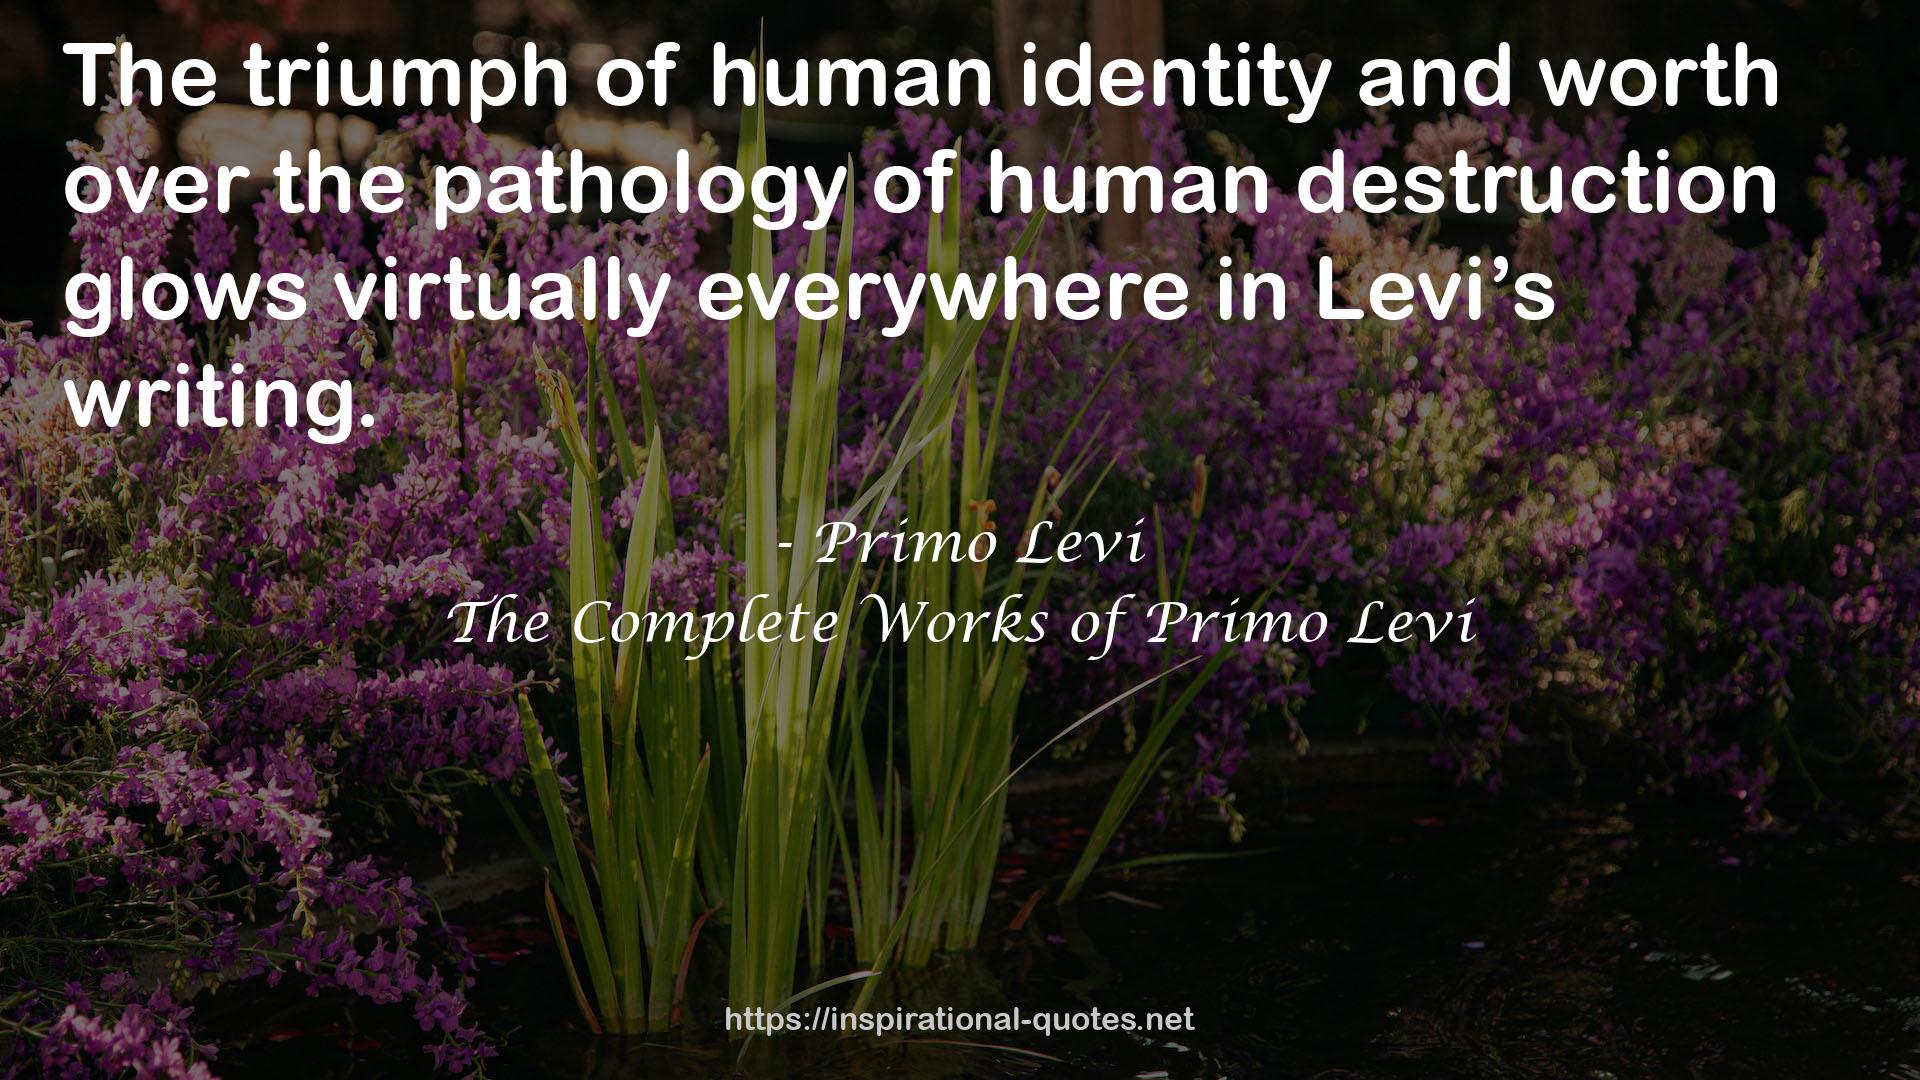 The Complete Works of Primo Levi QUOTES